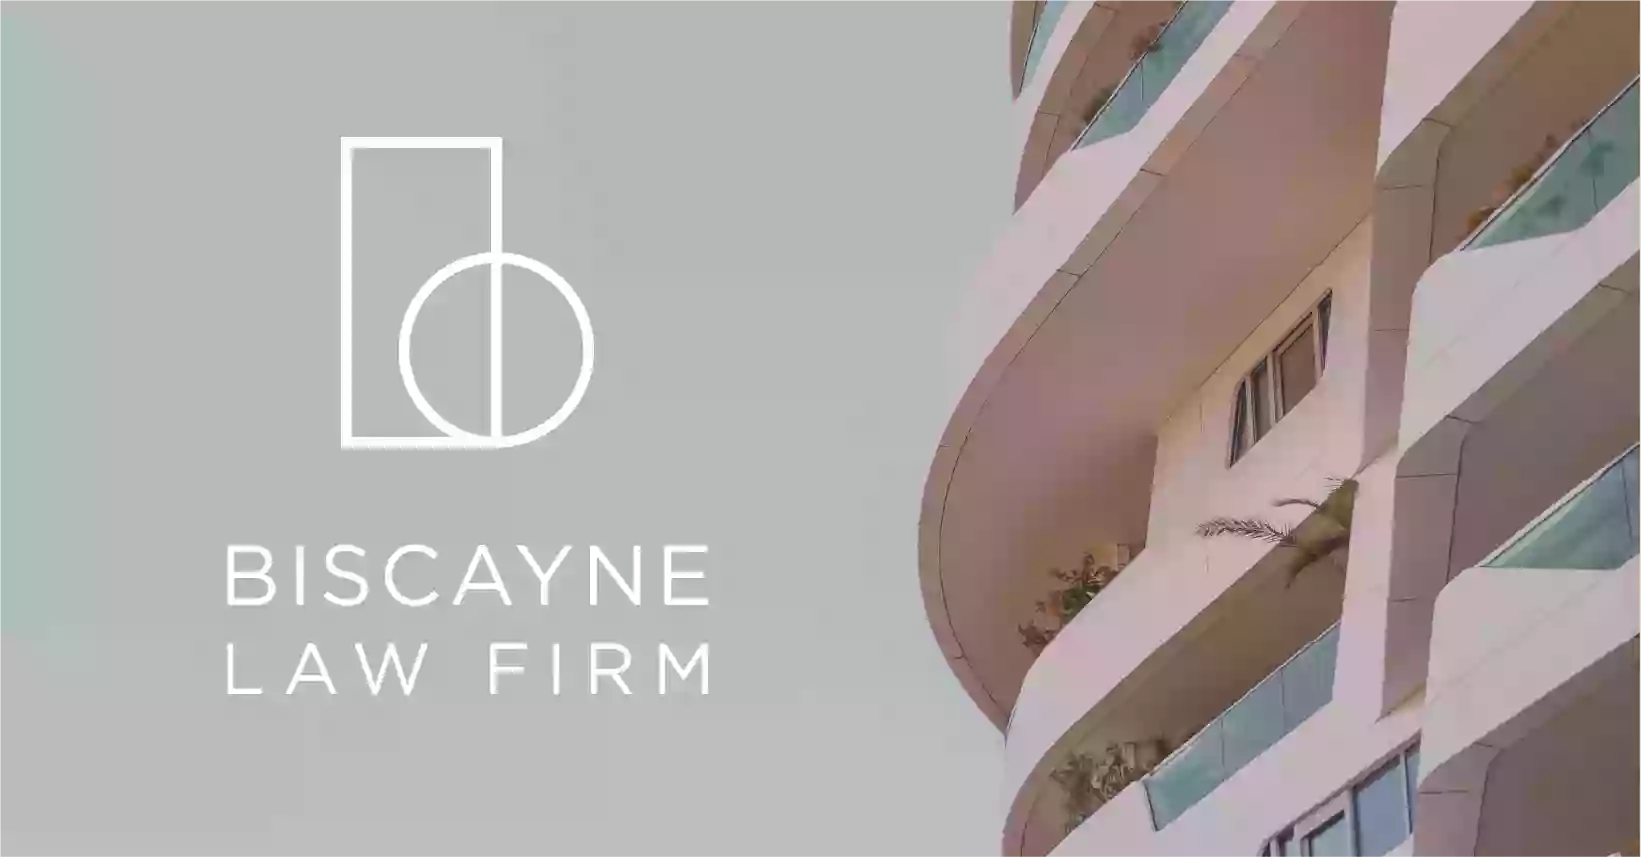 Biscayne Law Firm